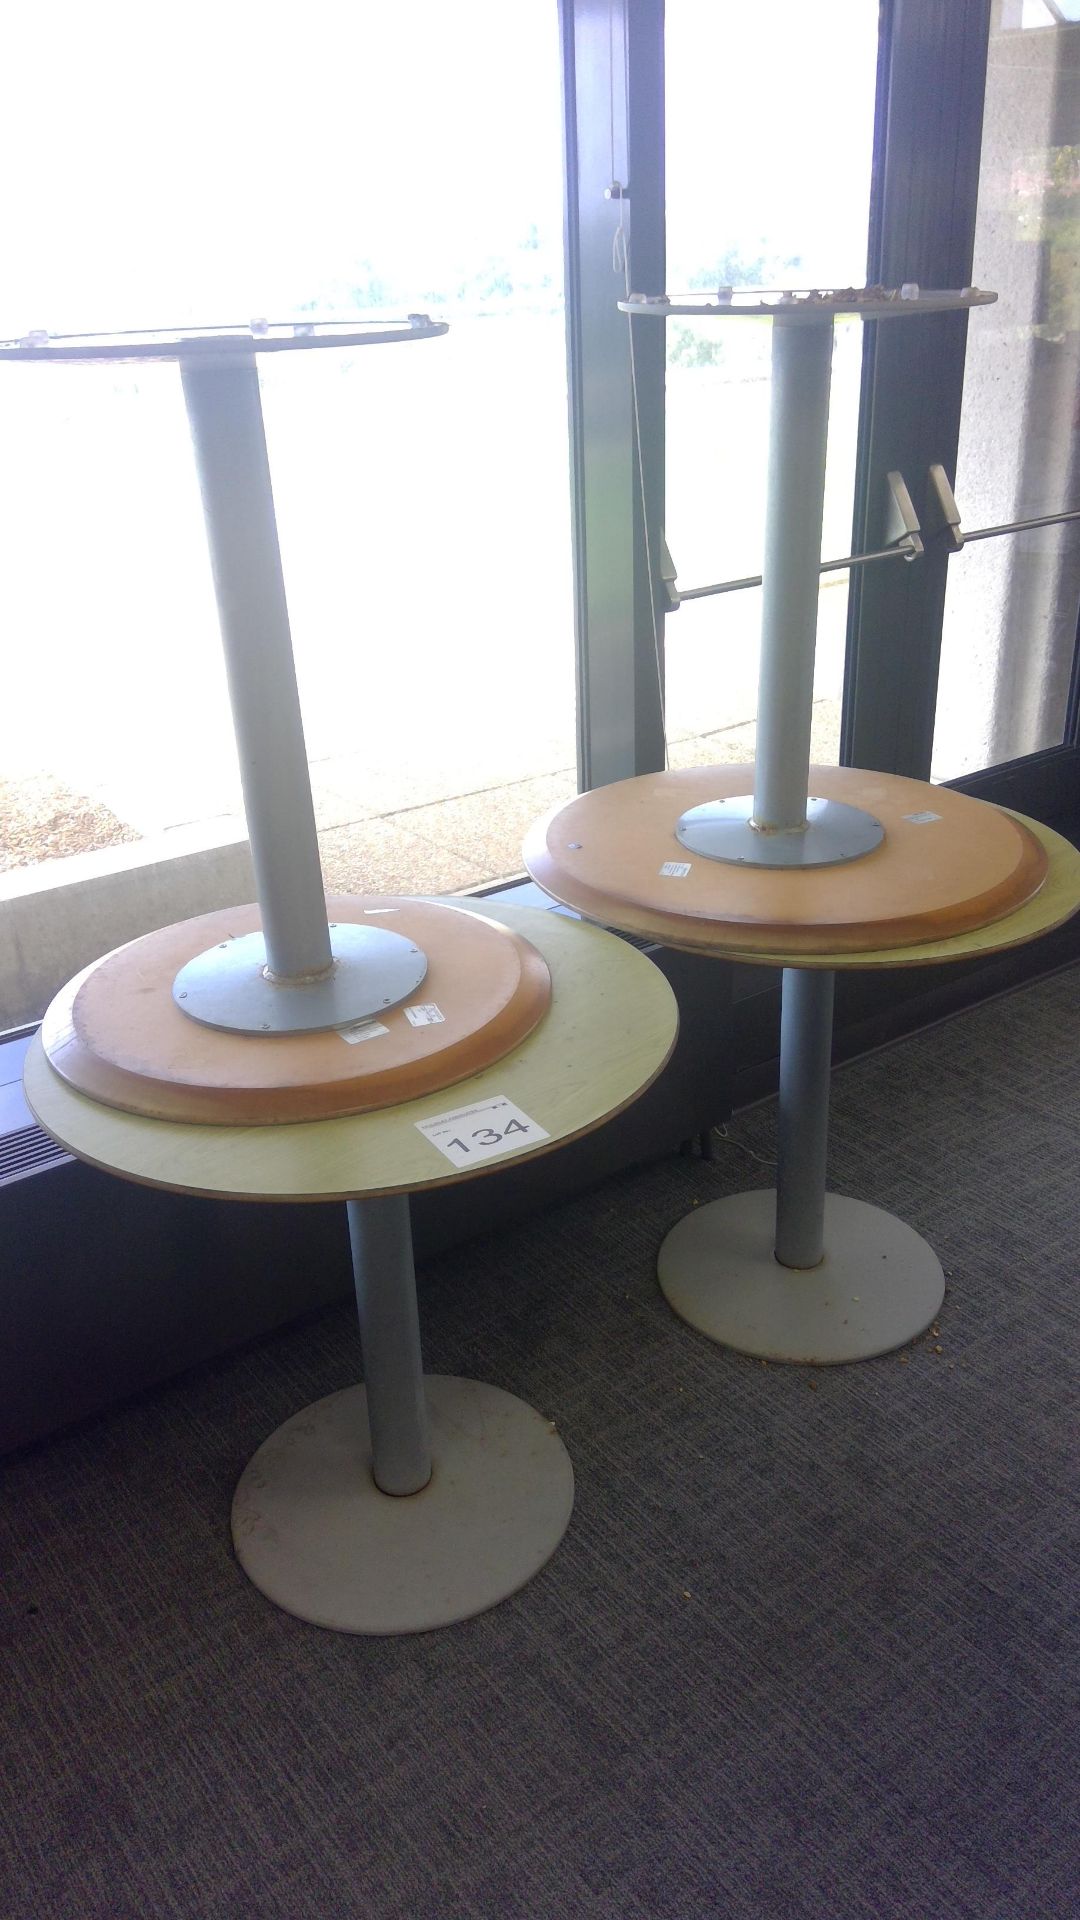 5 No. Beech effect circular tables complete with 12 No. Beech effect stacking chairs - Image 2 of 2